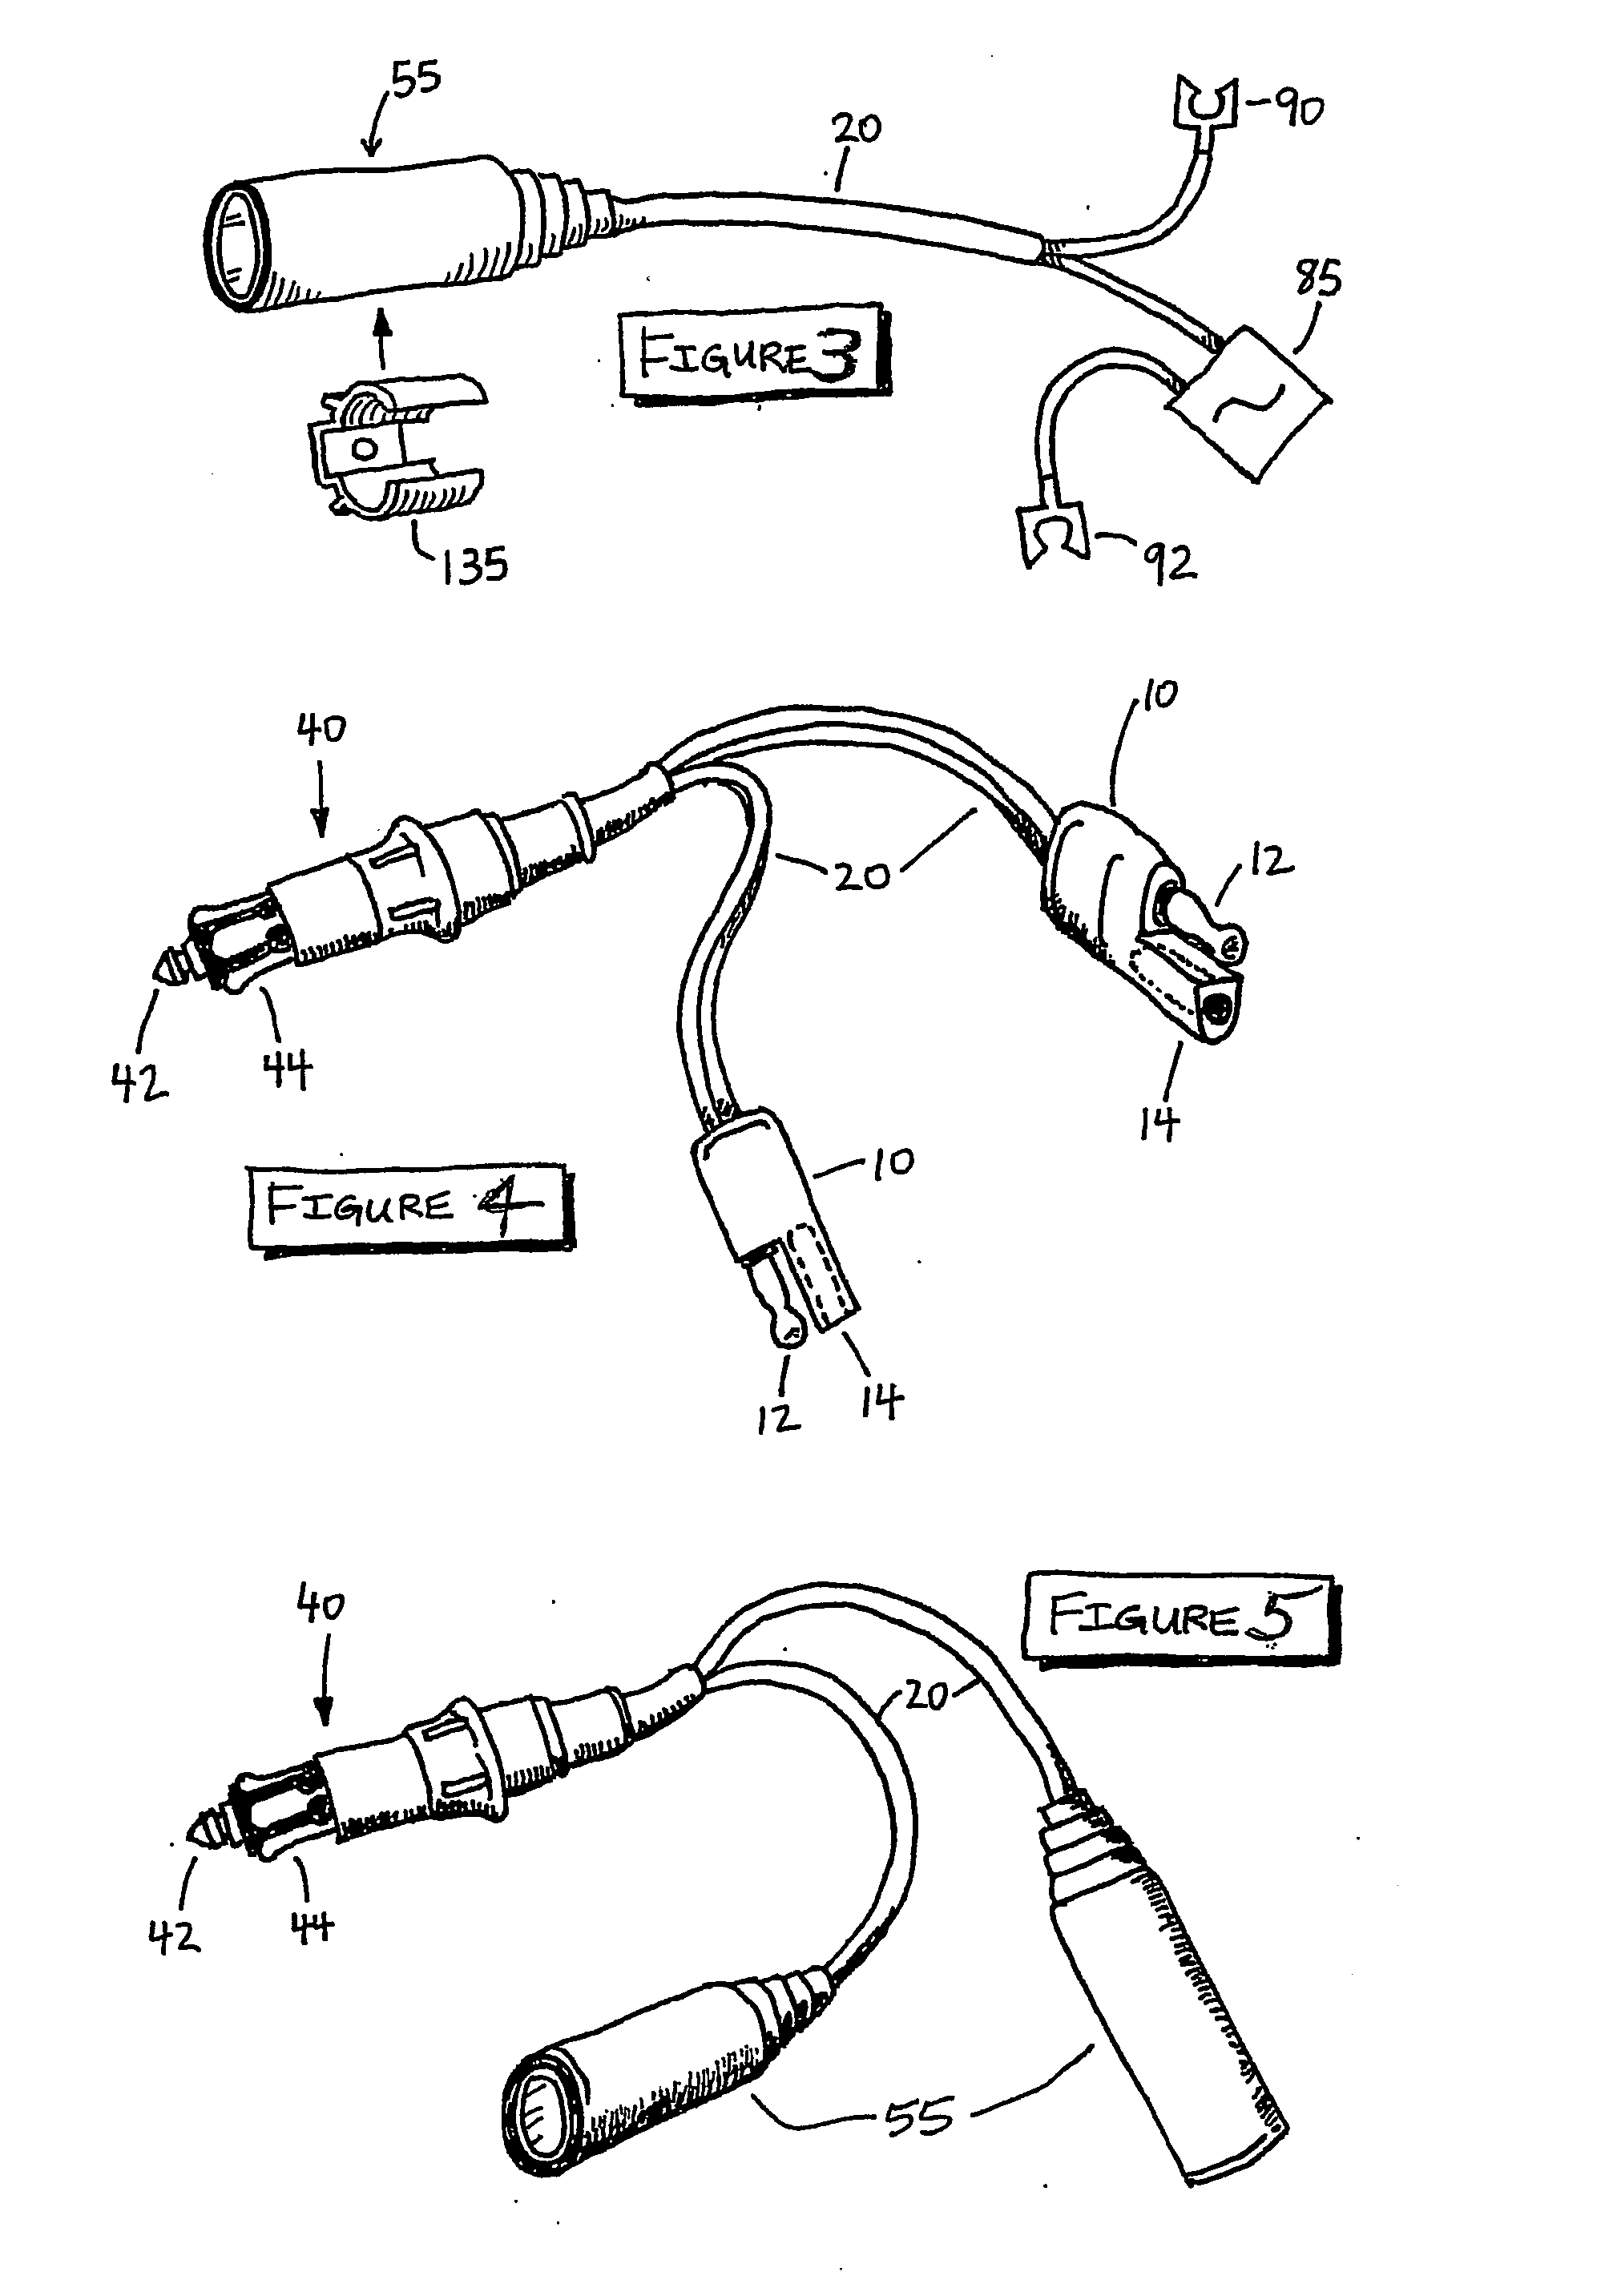 Vehicle accessory power connector